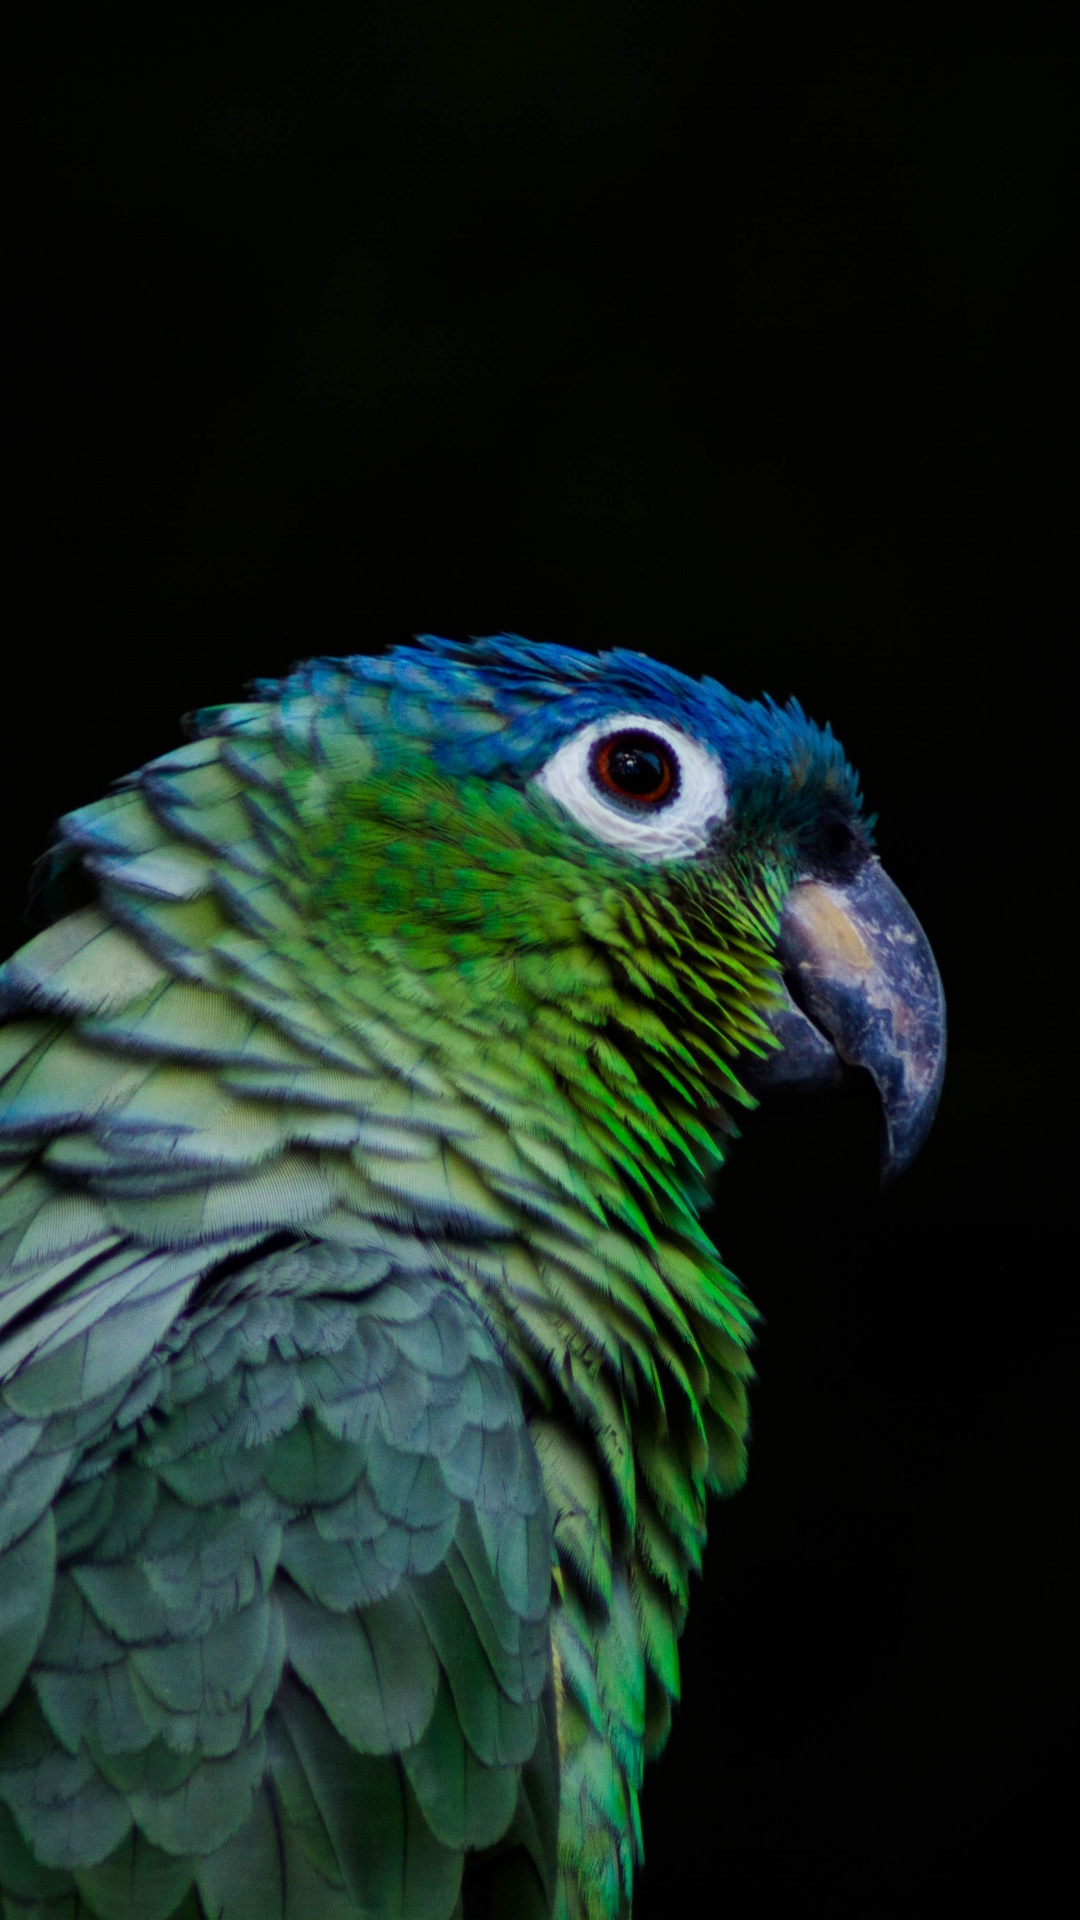 Green and Blue Parrot in Close up Photography. Wallpaper in 1080x1920 Resolution